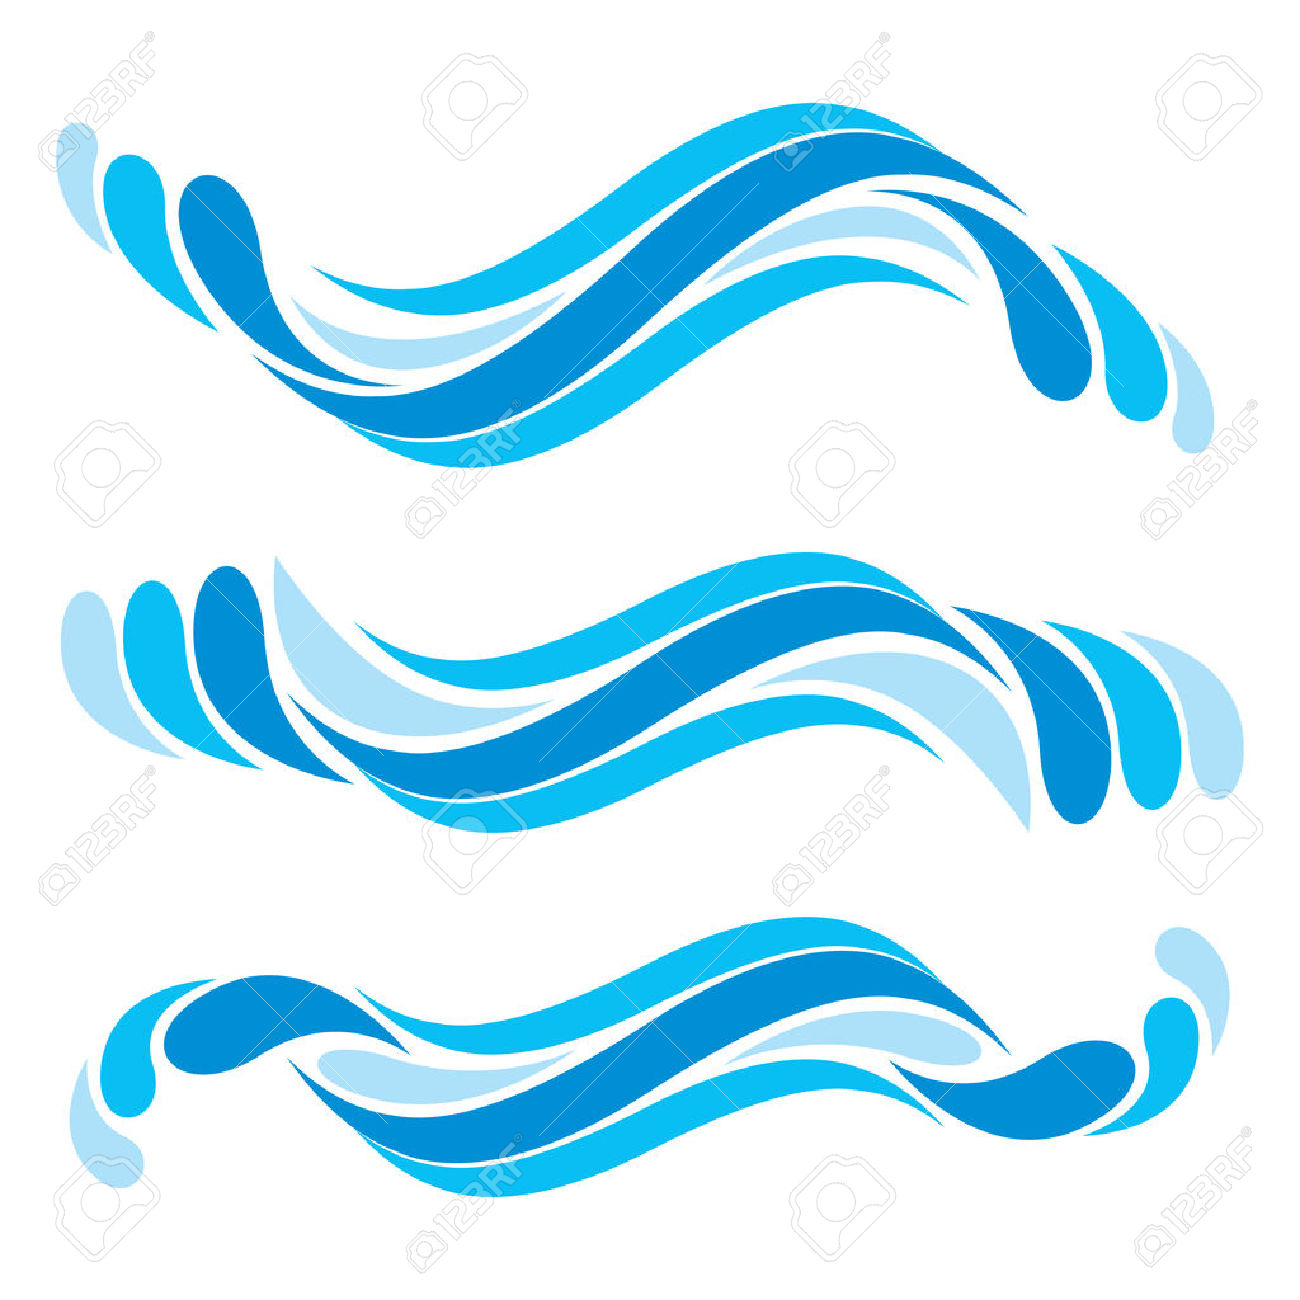 Clipart wave river wave. Flowing water free download